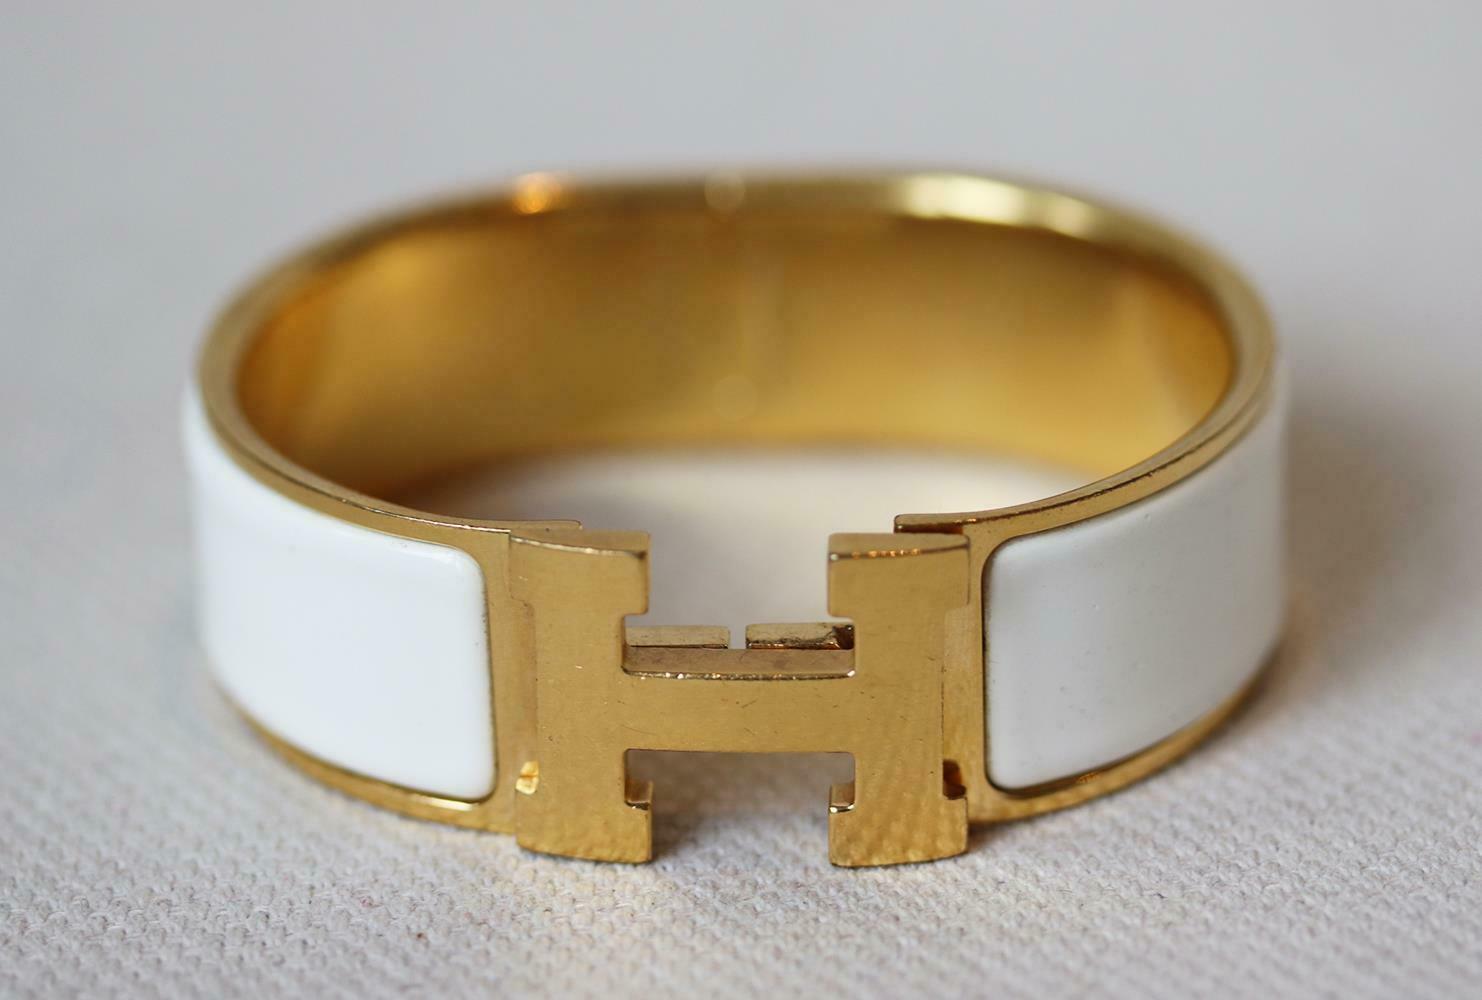 Hermès bracelet in craie cream enamel and gold-plated hardware. 
Craie cream enamel and gold-plated hardware. 
Push and twist closure.
Does not come with box or dustbag.

Dimensions: Circumference 6.8 x W 0.8 inches

Condition: Some wear to